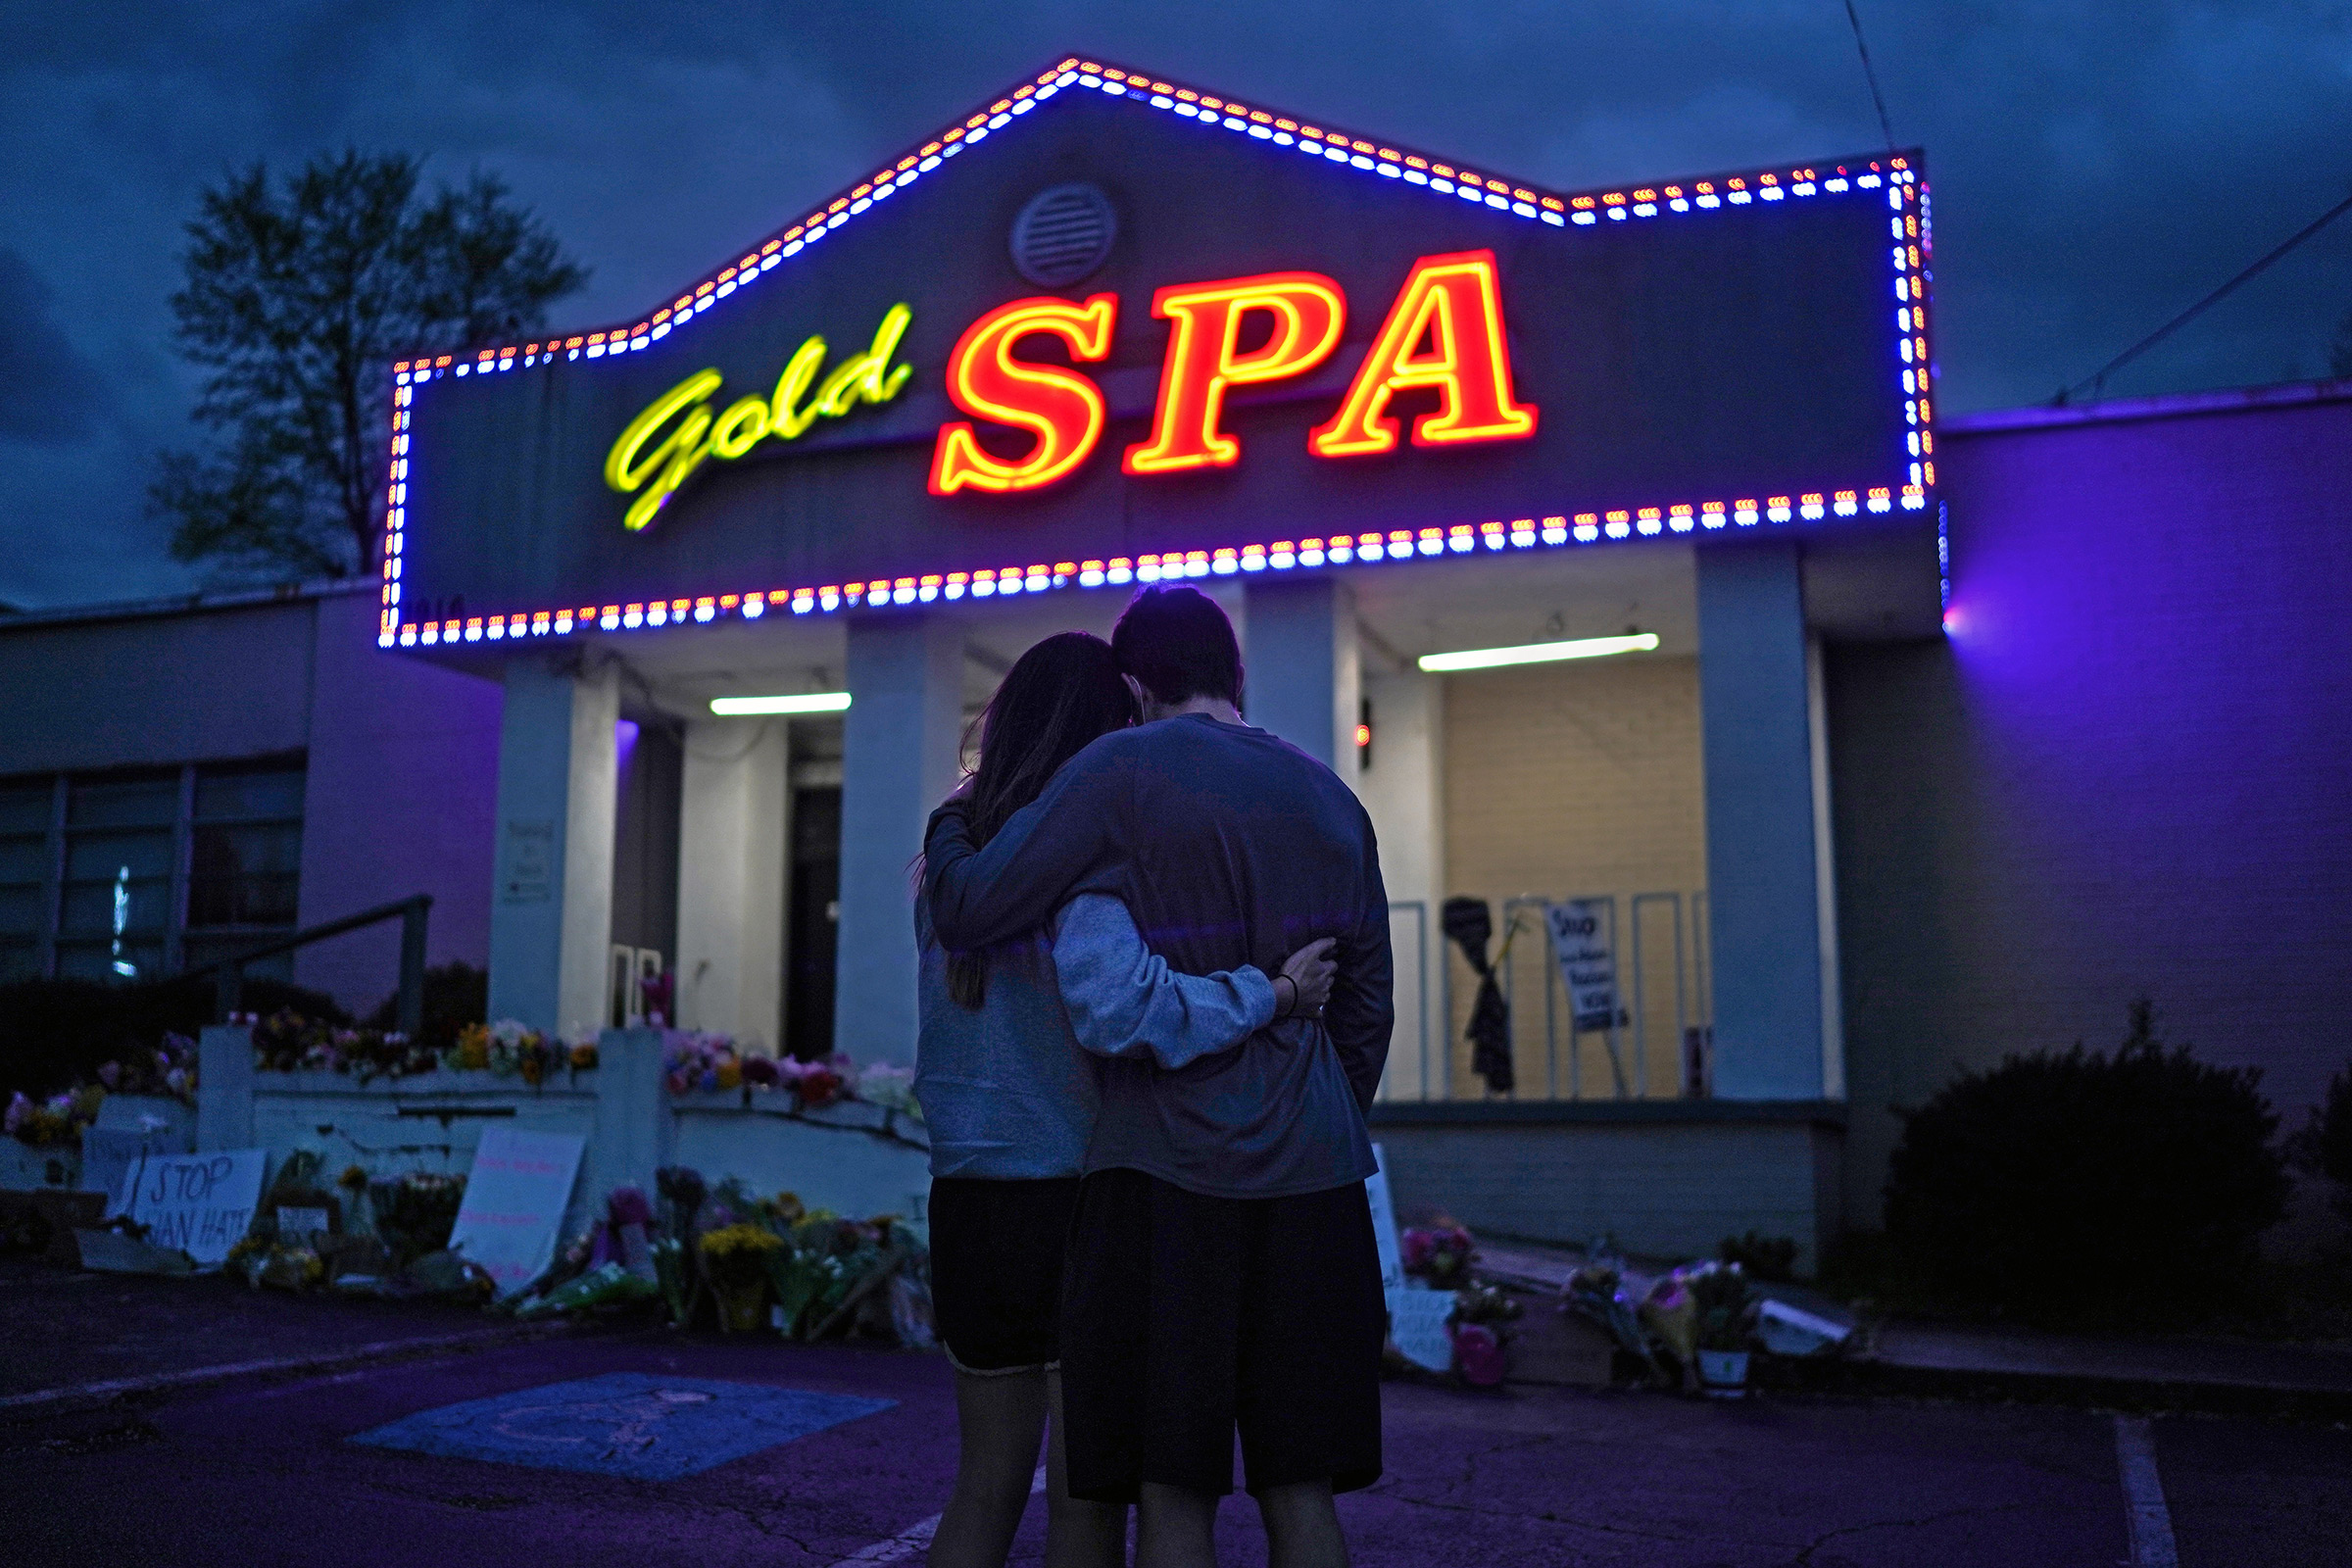 Cynthia Shi embraces her boyfriend, Graham Bloomsmith, outside Gold Spa in Atlanta, one of three massage businesses where a gunman killed eight people, on March 18, 2021.